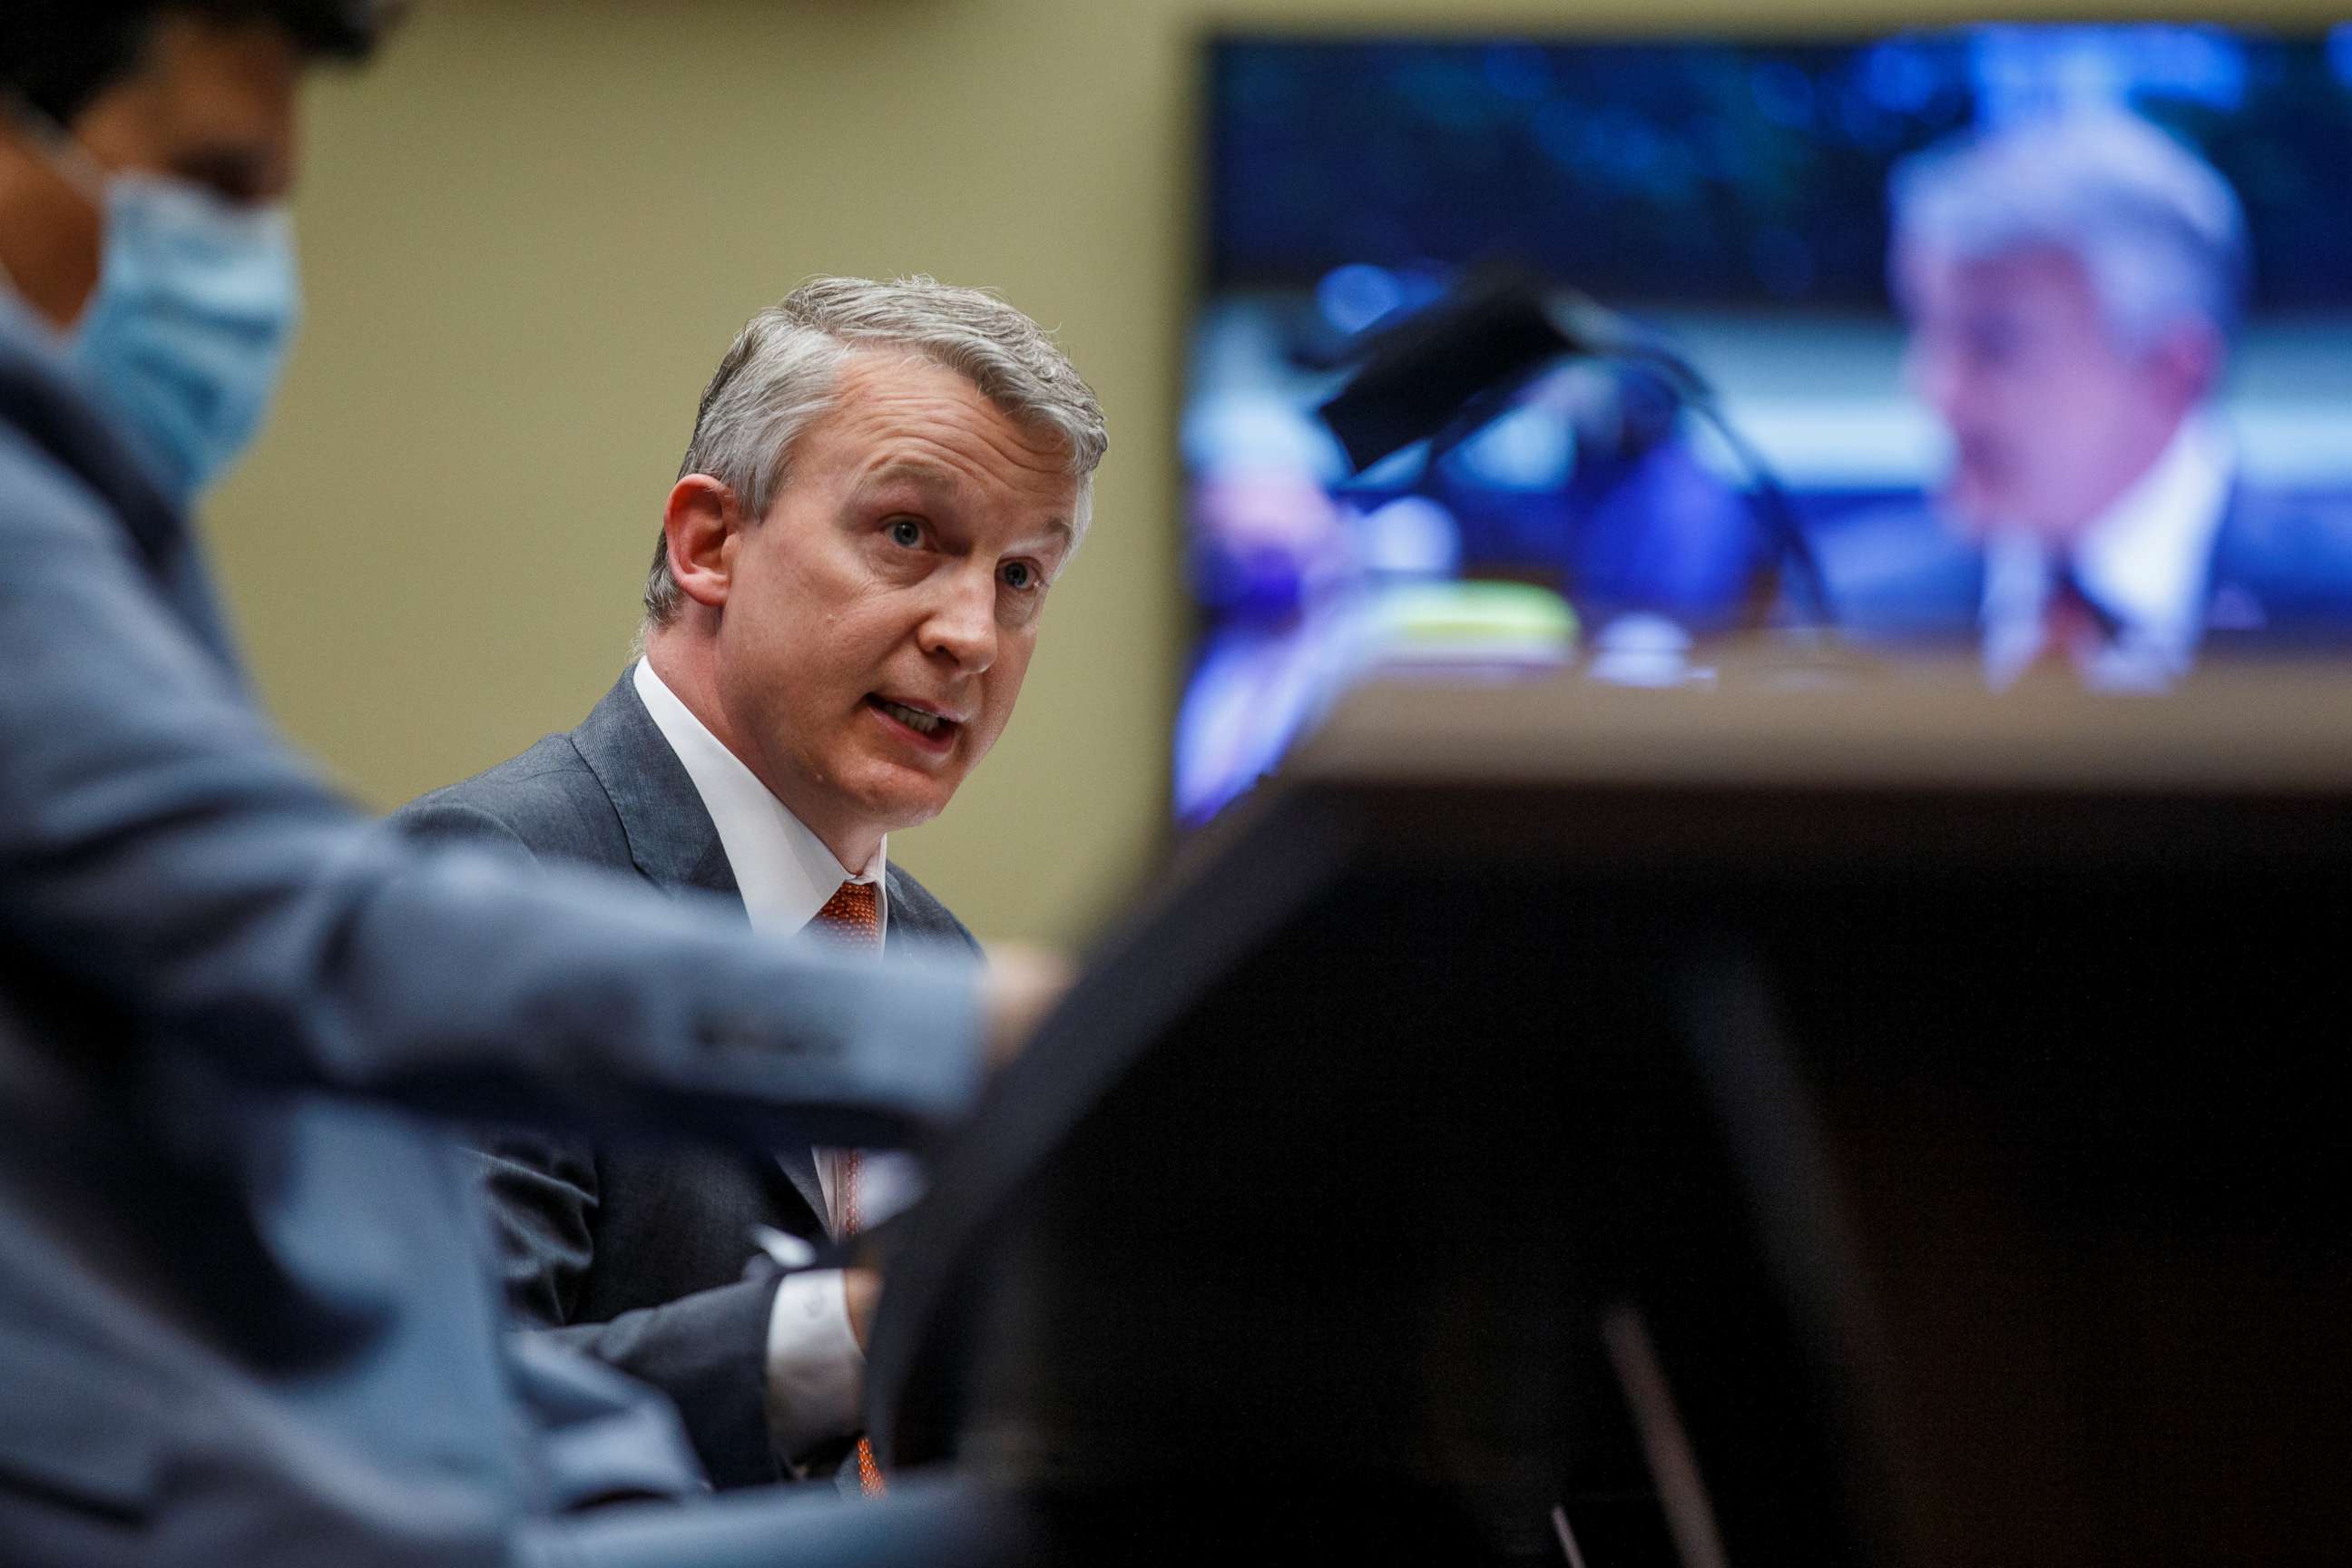 PHOTO: Dr. Richard Bright testifies during a House Energy and Commerce Subcommittee on Health hearing to discuss protecting scientific integrity in response to the coronavirus outbreak on Capitol Hill in Washington, May 14, 2020.